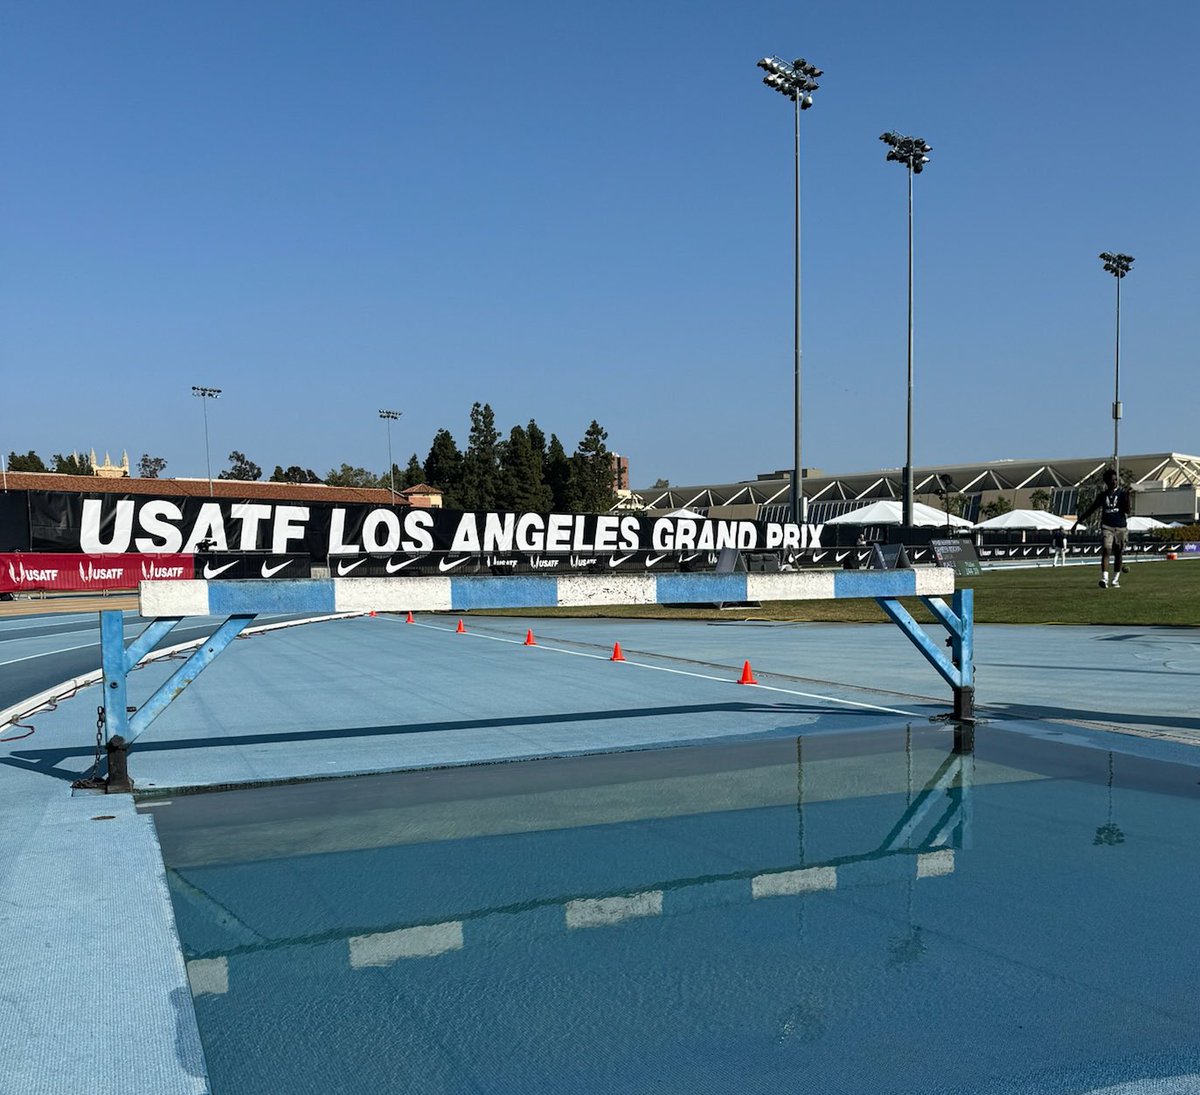 In LA tonight? Head over to UCLA’s Drake Stadium for the USATF Los Angeles Grand Prix! 🌴 Some of the top athletes in the world are competing until 9:30 p.m. 🎟️ Admission is FREE! Schedule: results.usatf.org/laGrandPrix24/ #JourneyToGold